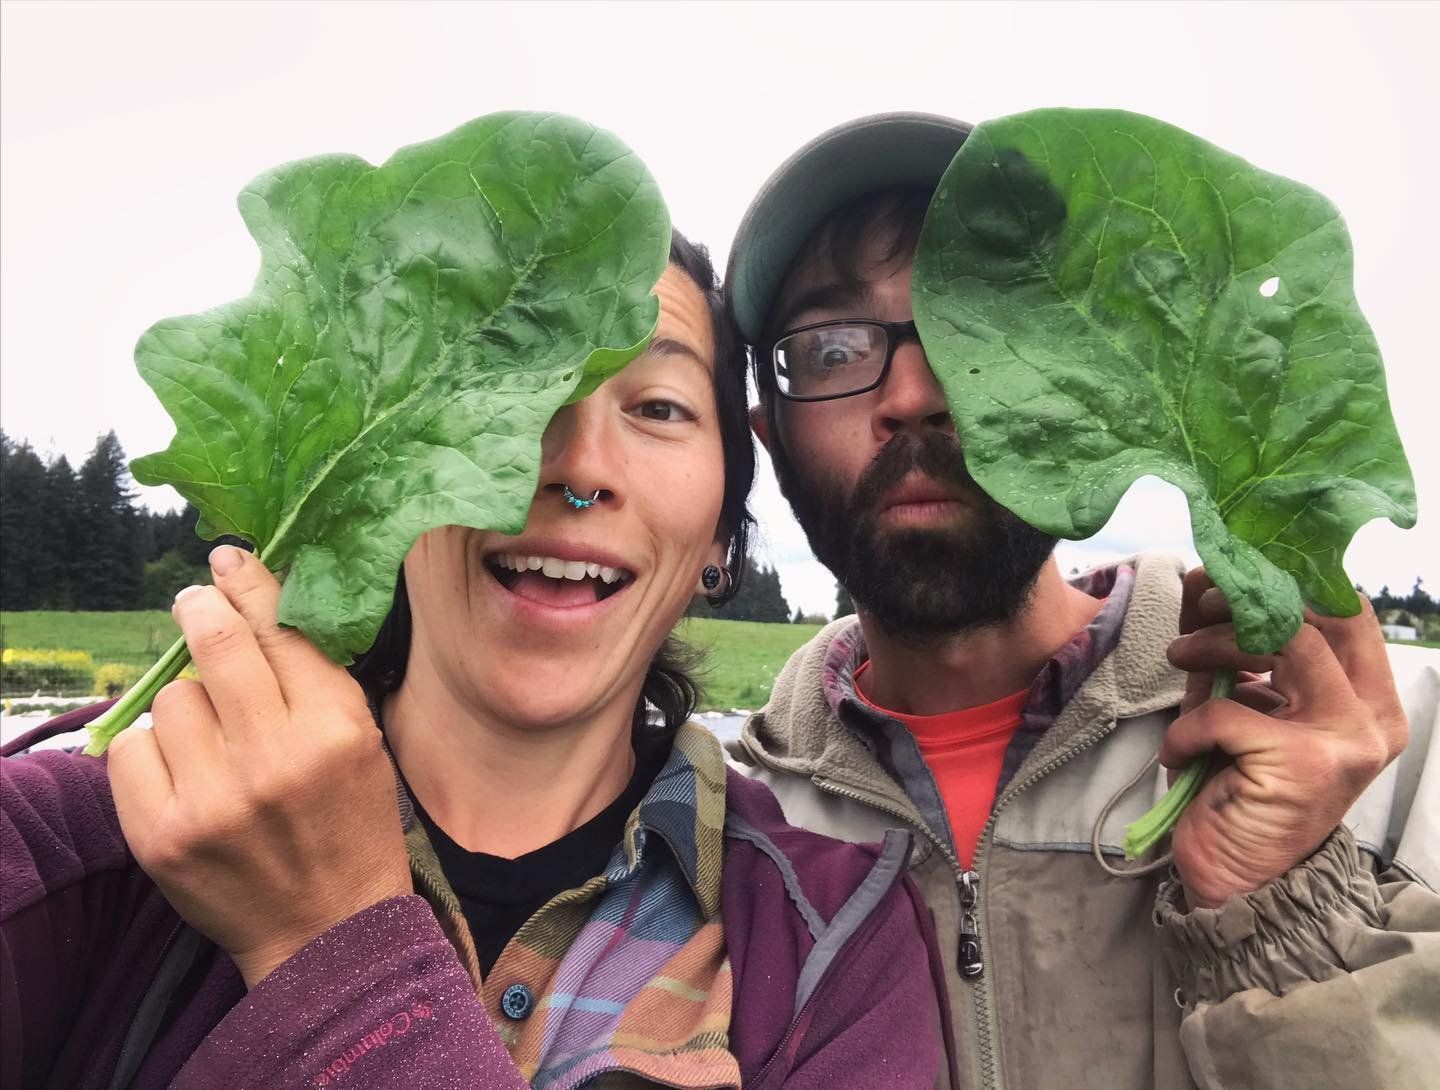 Next Happening: Farm Happenings for May 1, 2020